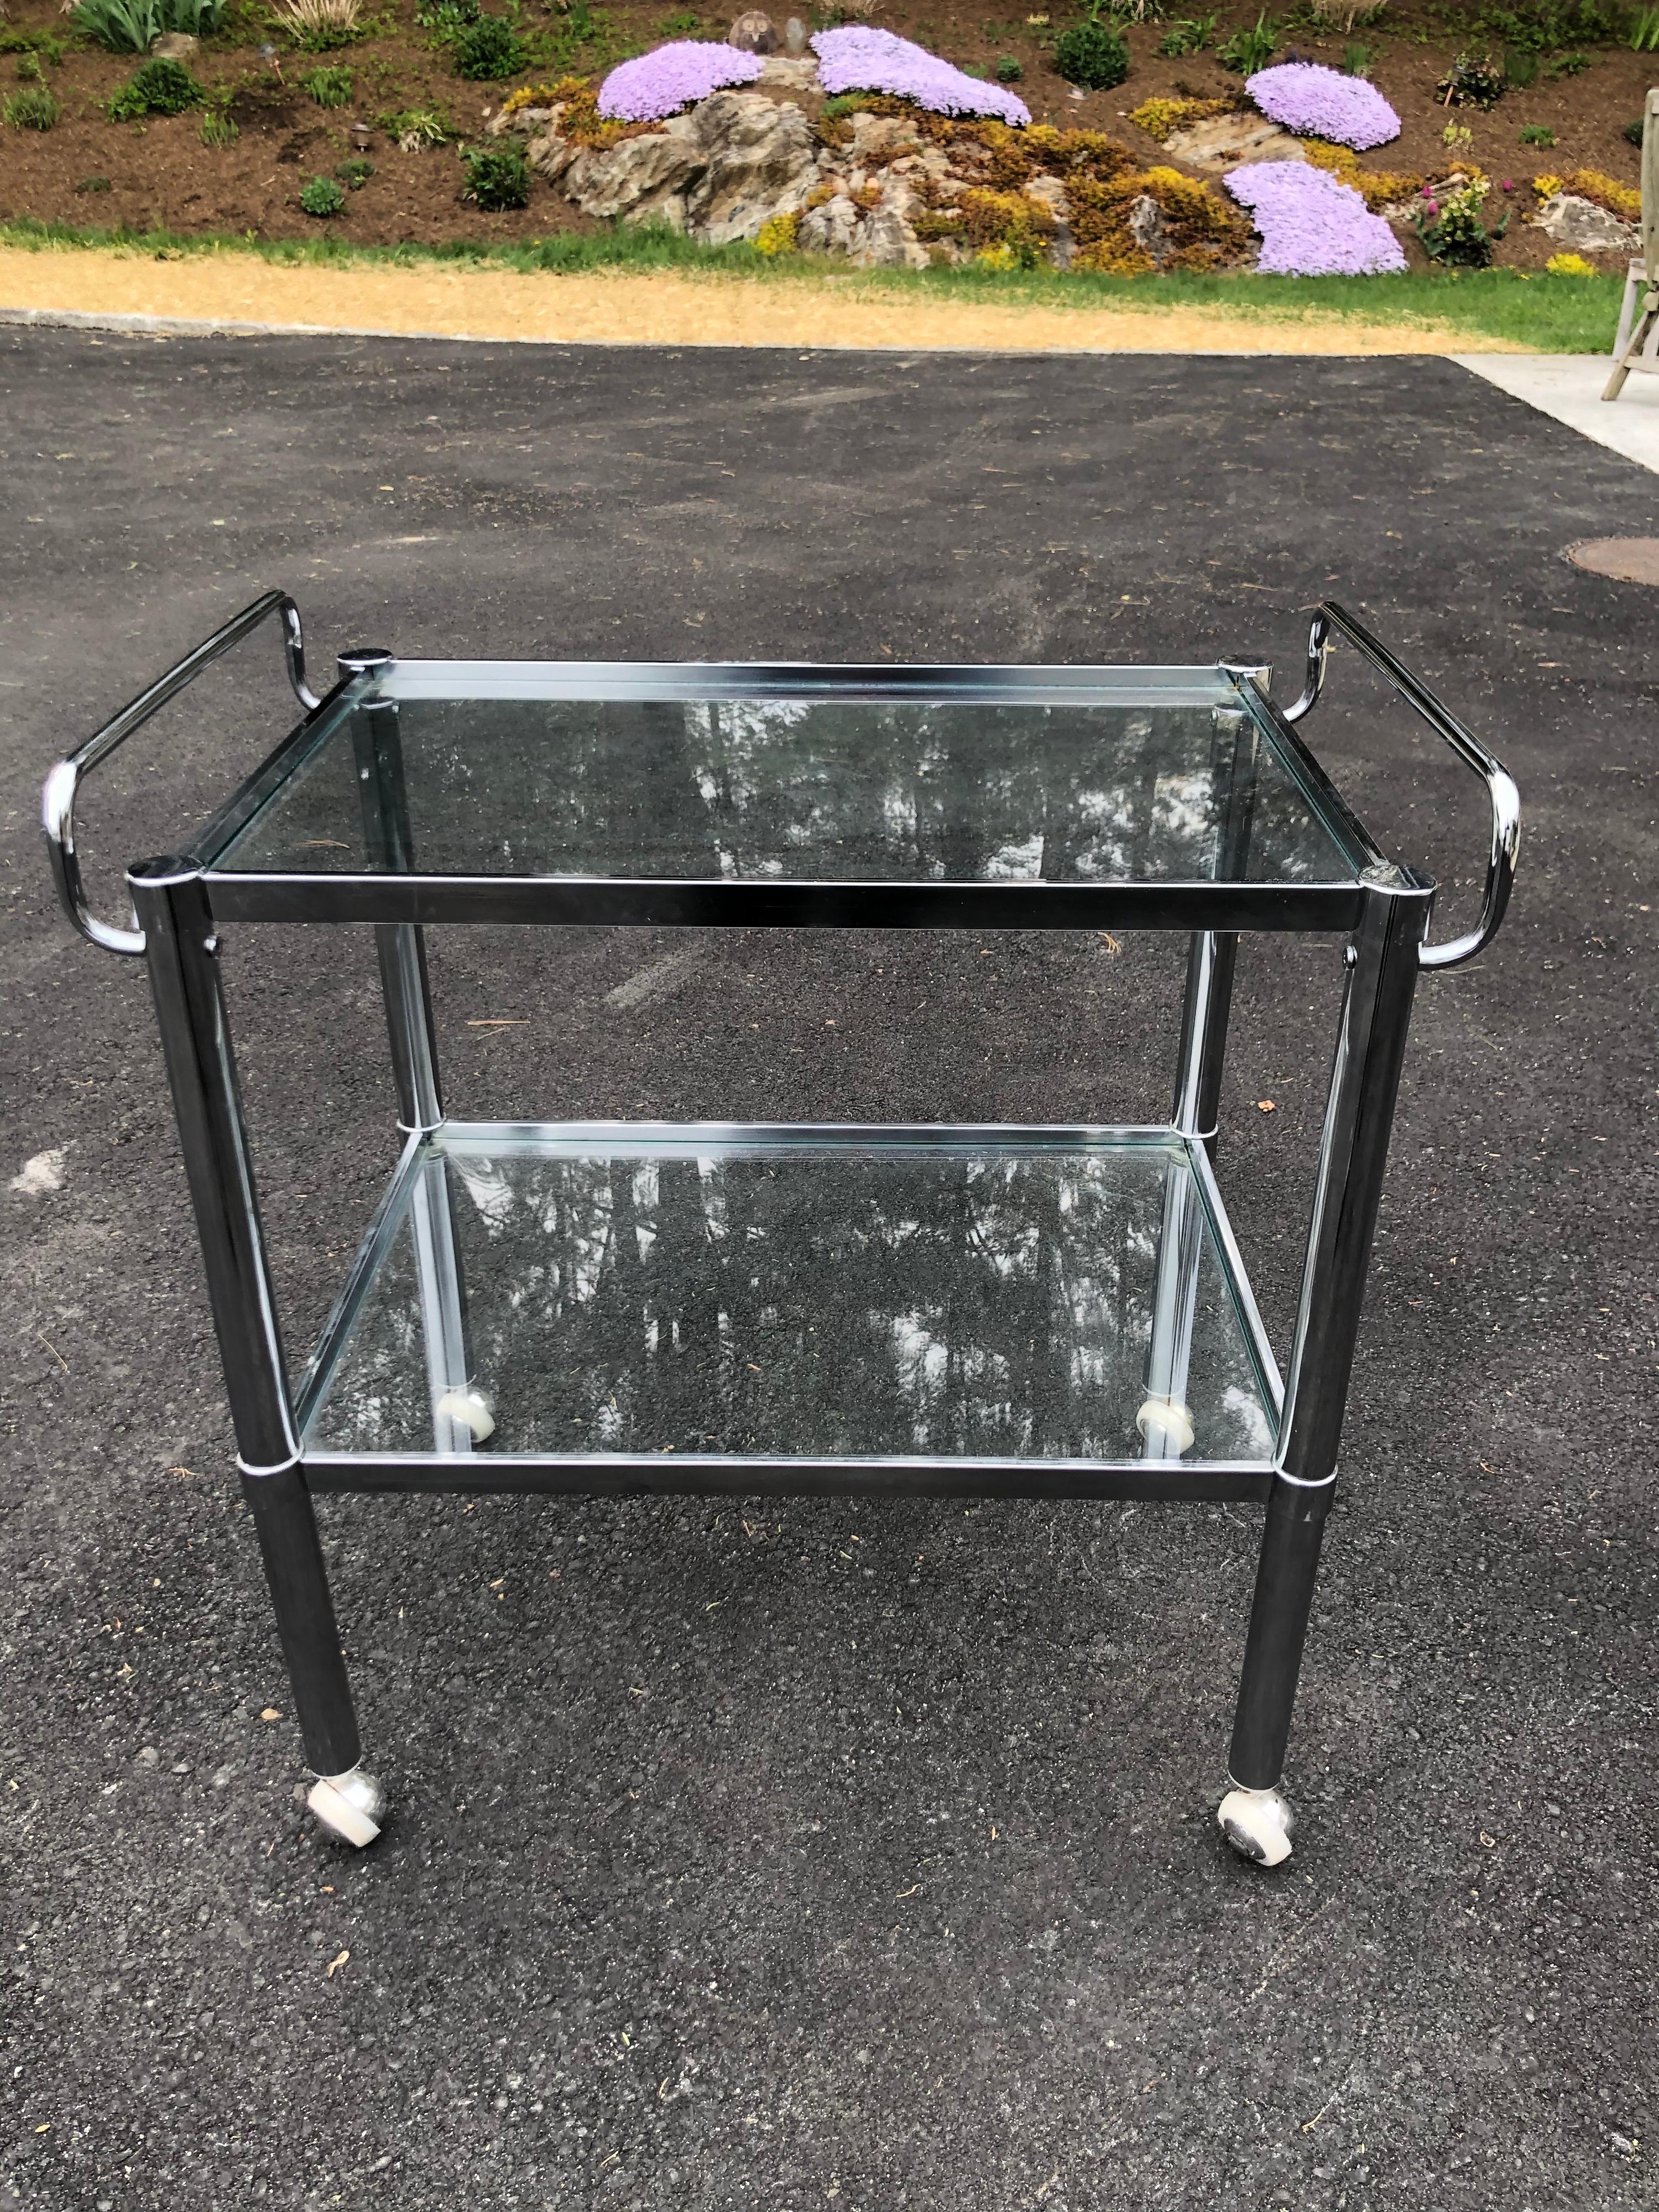 Mid-Century Modern two tiered bar cart. Classic minimalist lines to this functional piece. Twin handles adorn either side.
Perfect for entertaining.